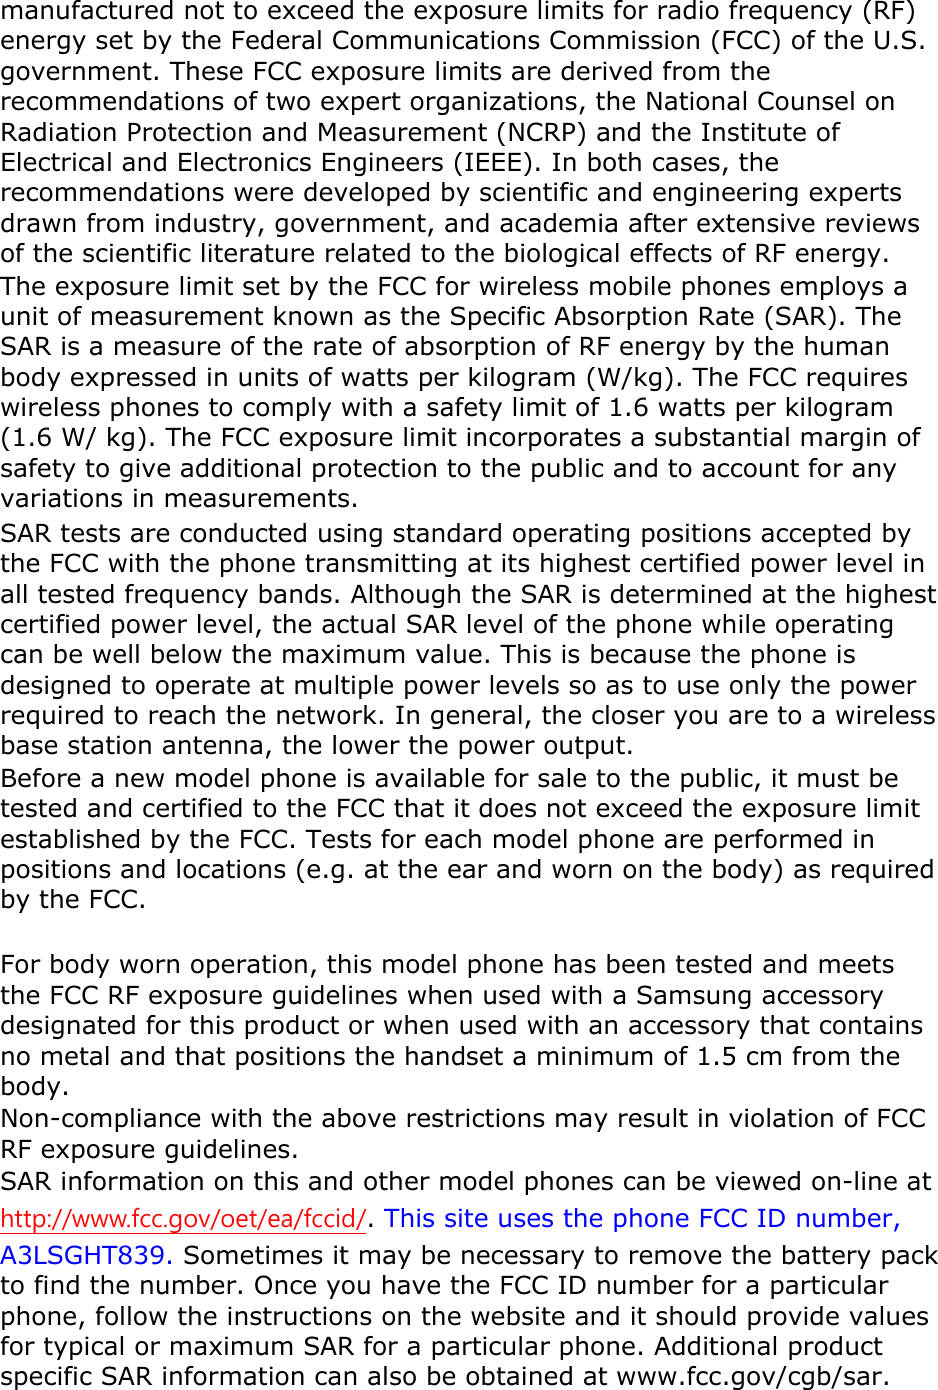 manufactured not to exceed the exposure limits for radio frequency (RF) energy set by the Federal Communications Commission (FCC) of the U.S. government. These FCC exposure limits are derived from the recommendations of two expert organizations, the National Counsel on Radiation Protection and Measurement (NCRP) and the Institute of Electrical and Electronics Engineers (IEEE). In both cases, the recommendations were developed by scientific and engineering experts drawn from industry, government, and academia after extensive reviews of the scientific literature related to the biological effects of RF energy. The exposure limit set by the FCC for wireless mobile phones employs a unit of measurement known as the Specific Absorption Rate (SAR). The SAR is a measure of the rate of absorption of RF energy by the human body expressed in units of watts per kilogram (W/kg). The FCC requires wireless phones to comply with a safety limit of 1.6 watts per kilogram (1.6 W/ kg). The FCC exposure limit incorporates a substantial margin of safety to give additional protection to the public and to account for any variations in measurements. SAR tests are conducted using standard operating positions accepted by the FCC with the phone transmitting at its highest certified power level in all tested frequency bands. Although the SAR is determined at the highest certified power level, the actual SAR level of the phone while operating can be well below the maximum value. This is because the phone is designed to operate at multiple power levels so as to use only the power required to reach the network. In general, the closer you are to a wireless base station antenna, the lower the power output. Before a new model phone is available for sale to the public, it must be tested and certified to the FCC that it does not exceed the exposure limit established by the FCC. Tests for each model phone are performed in positions and locations (e.g. at the ear and worn on the body) as required by the FCC.      For body worn operation, this model phone has been tested and meets the FCC RF exposure guidelines when used with a Samsung accessory designated for this product or when used with an accessory that contains no metal and that positions the handset a minimum of 1.5 cm from the body.  Non-compliance with the above restrictions may result in violation of FCC RF exposure guidelines. SAR information on this and other model phones can be viewed on-line at http://www.fcc.gov/oet/ea/fccid/. This site uses the phone FCC ID number, A3LSGHT839. Sometimes it may be necessary to remove the battery pack to find the number. Once you have the FCC ID number for a particular phone, follow the instructions on the website and it should provide values for typical or maximum SAR for a particular phone. Additional product specific SAR information can also be obtained at www.fcc.gov/cgb/sar. 